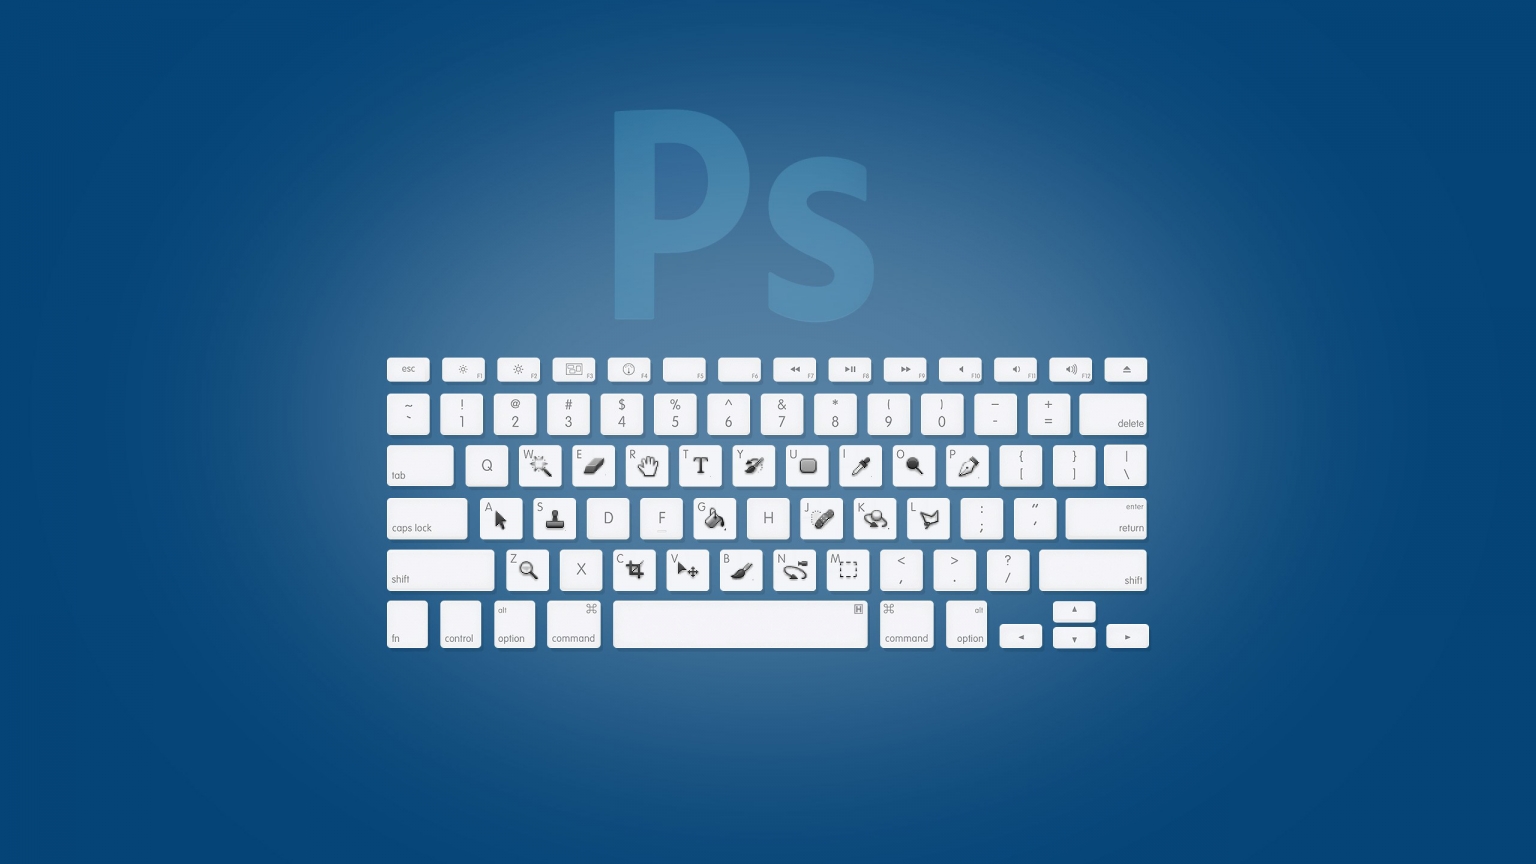 Photoshop Keyboard for 1536 x 864 HDTV resolution